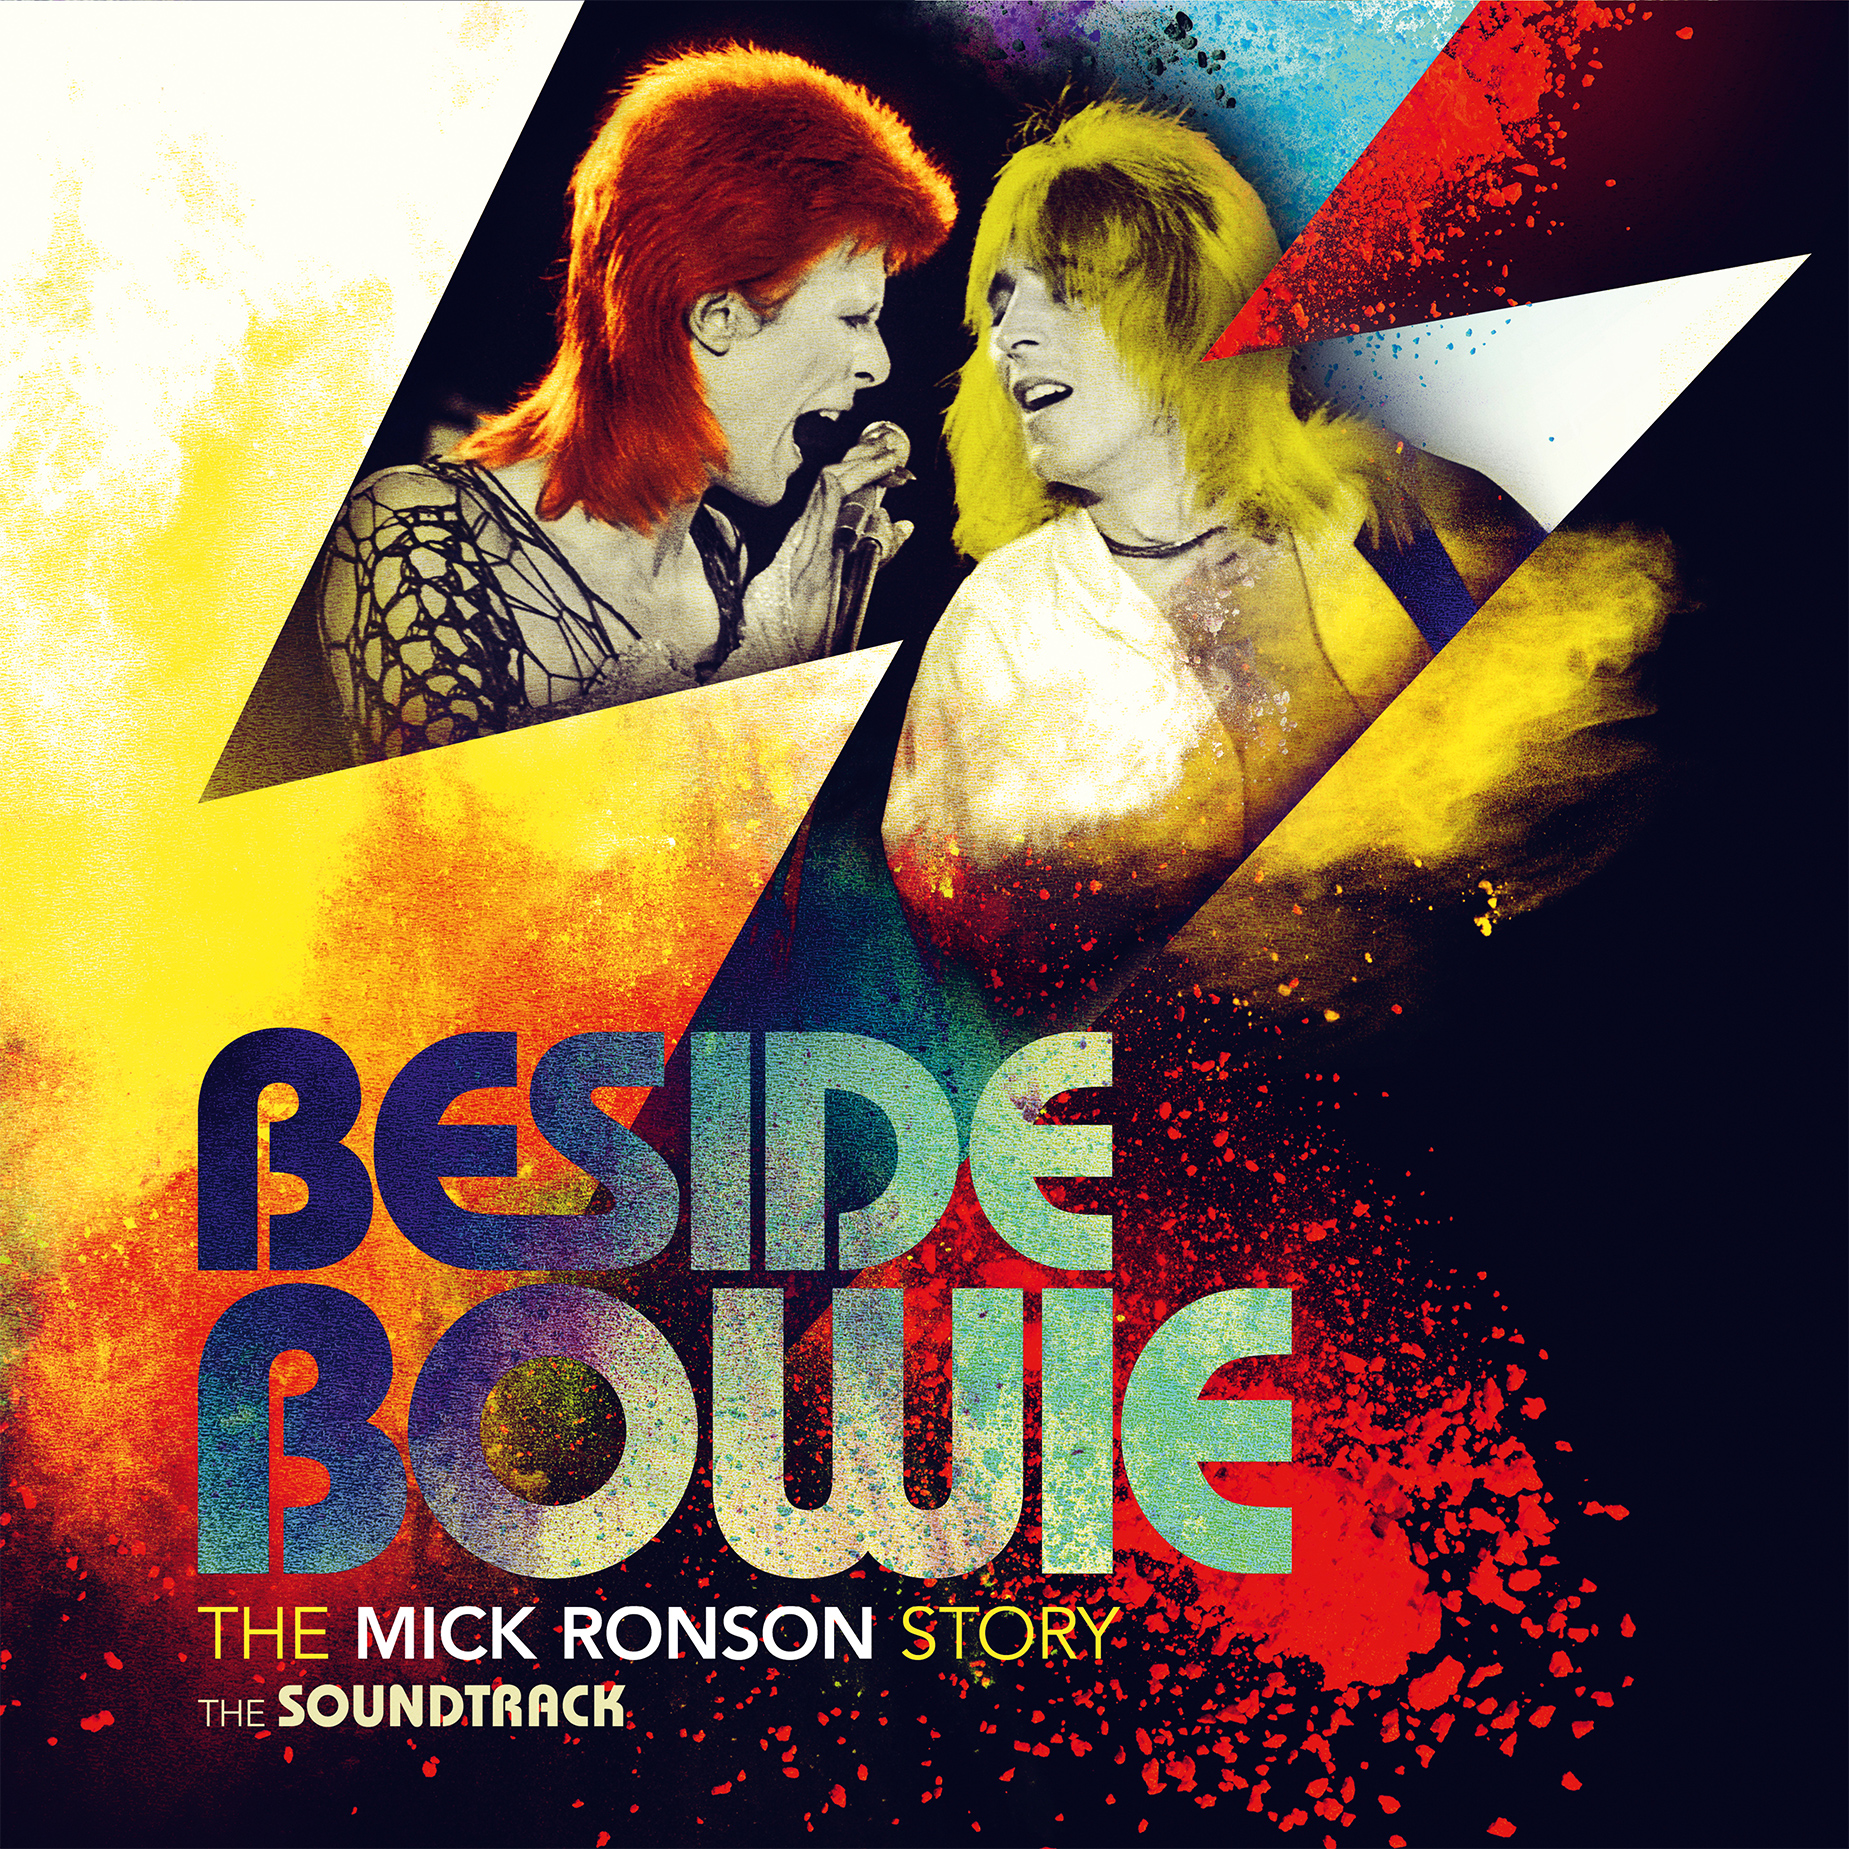 SOUNDTRACK TO BESIDE BOWIE: THE MICK RONSON STORY